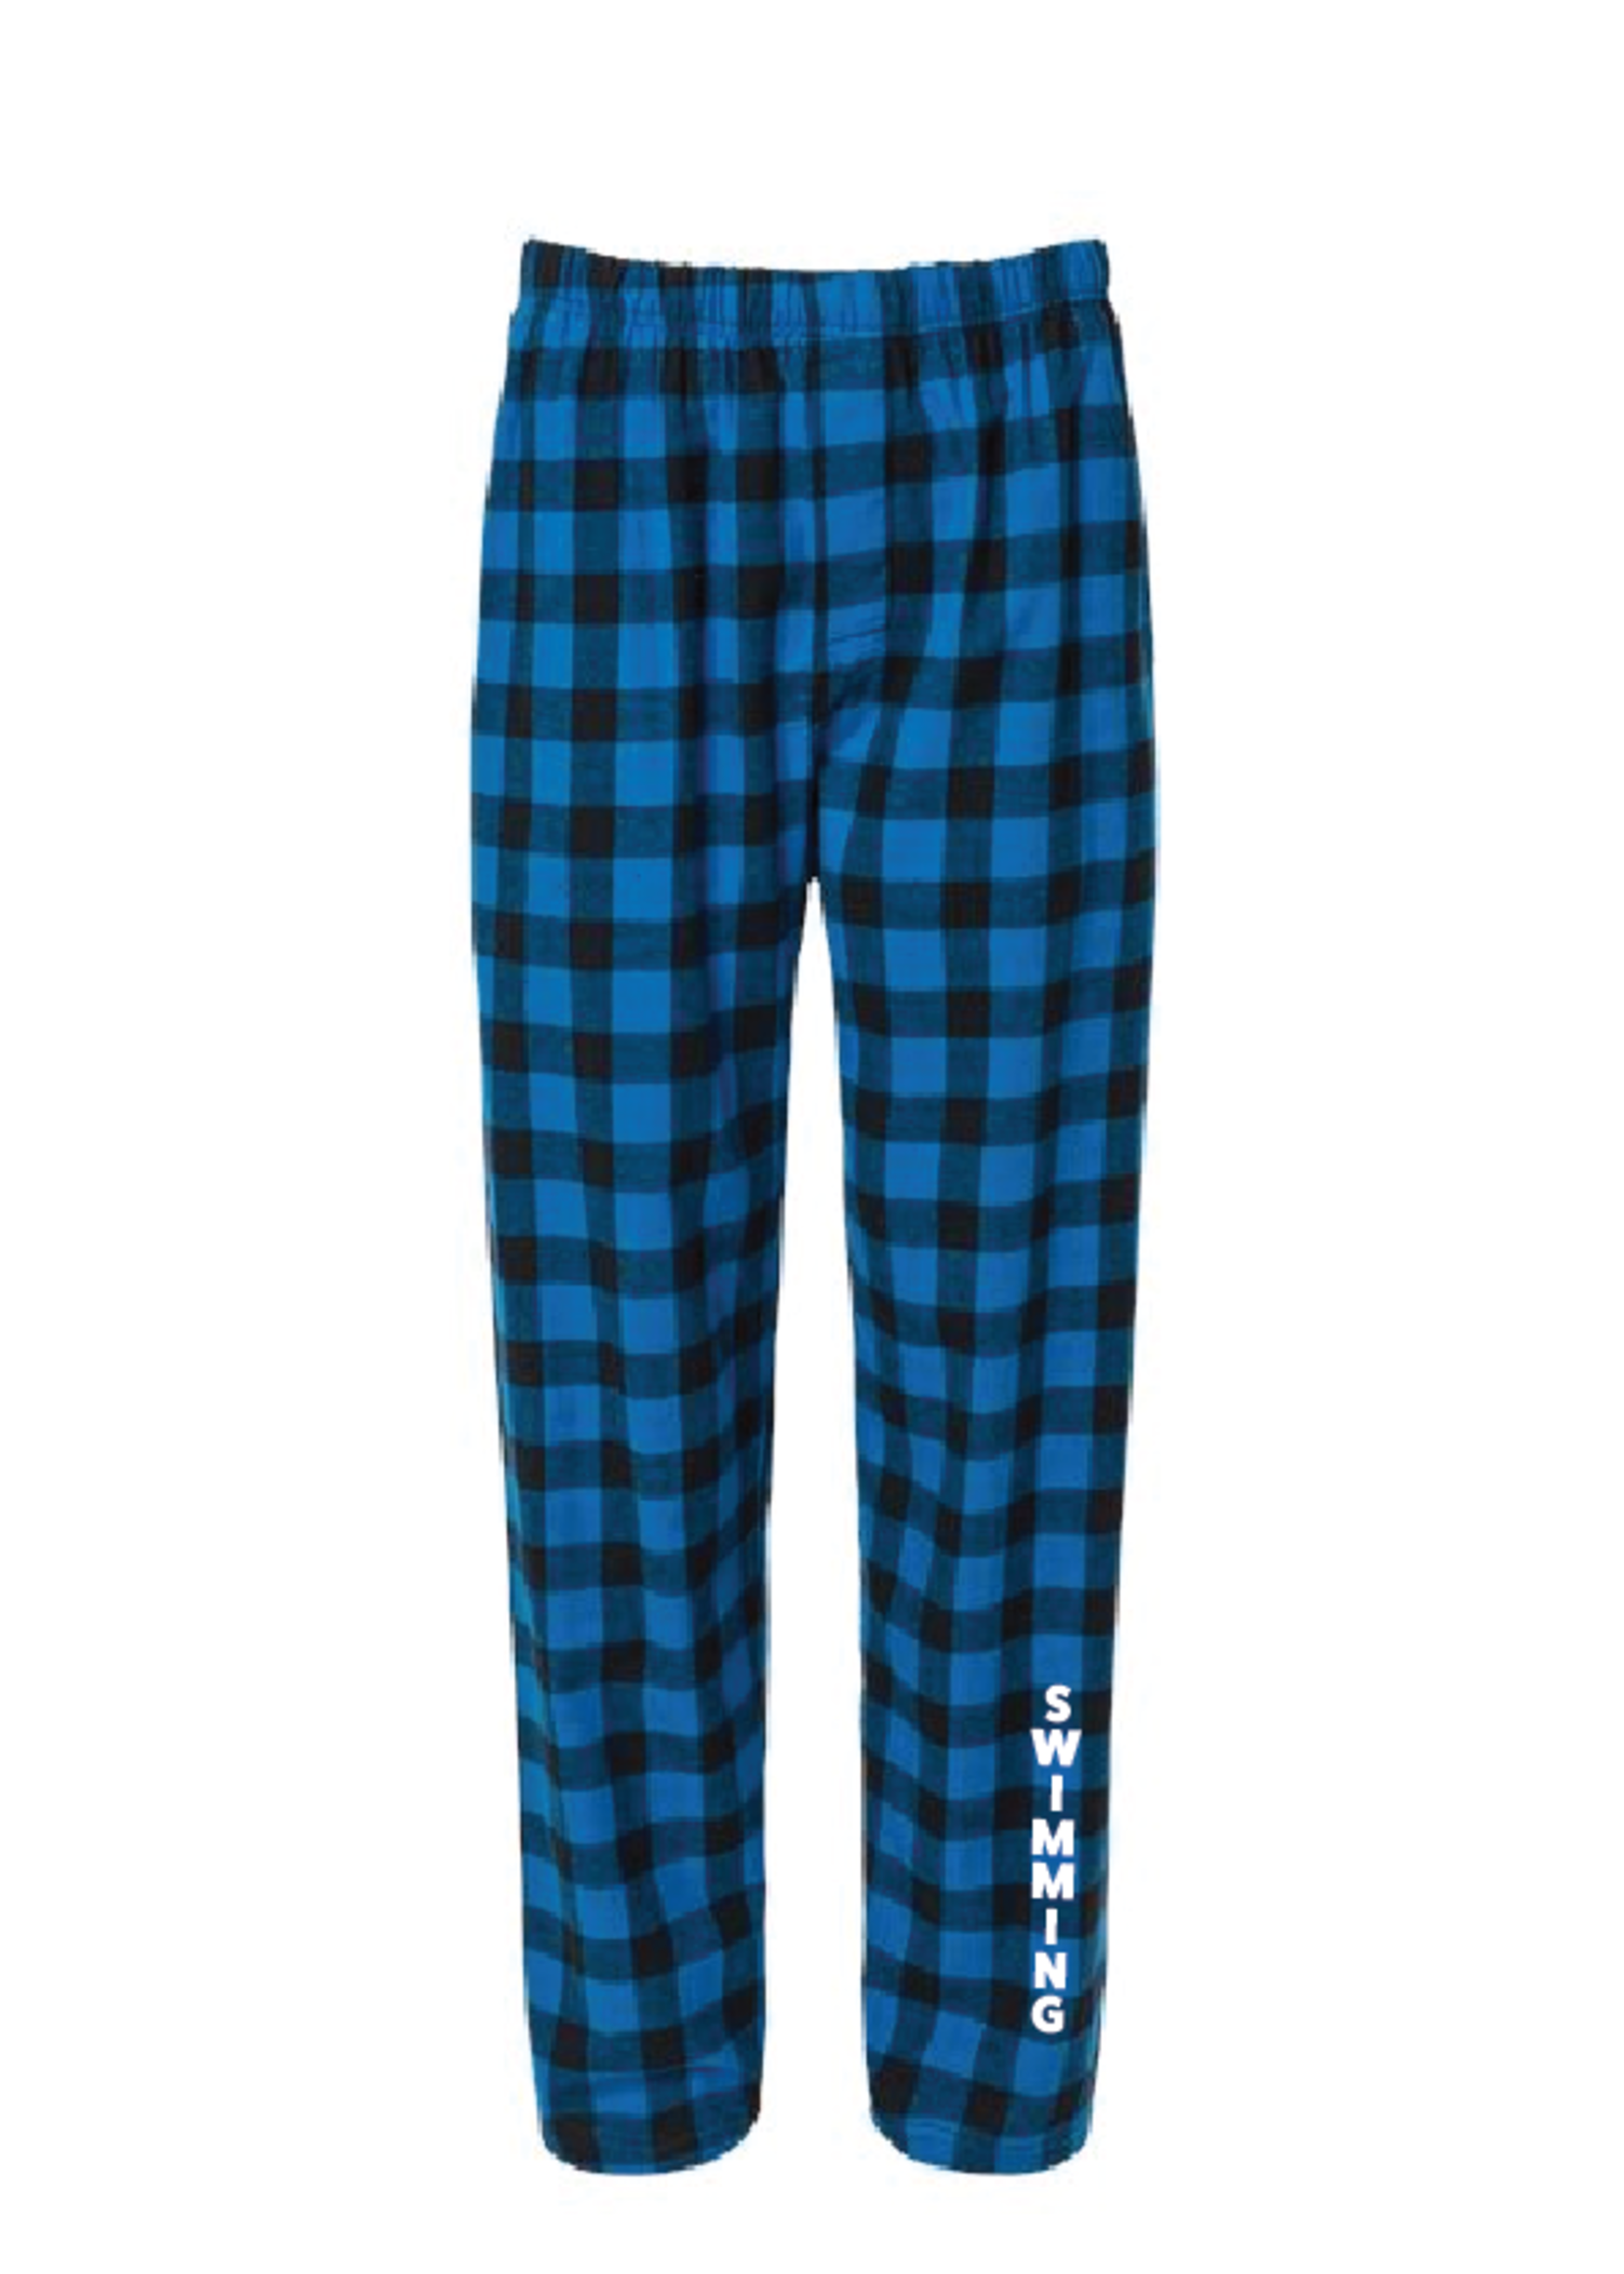 Aquatic Outfitters of Ohio Flannel Pant - Swimming